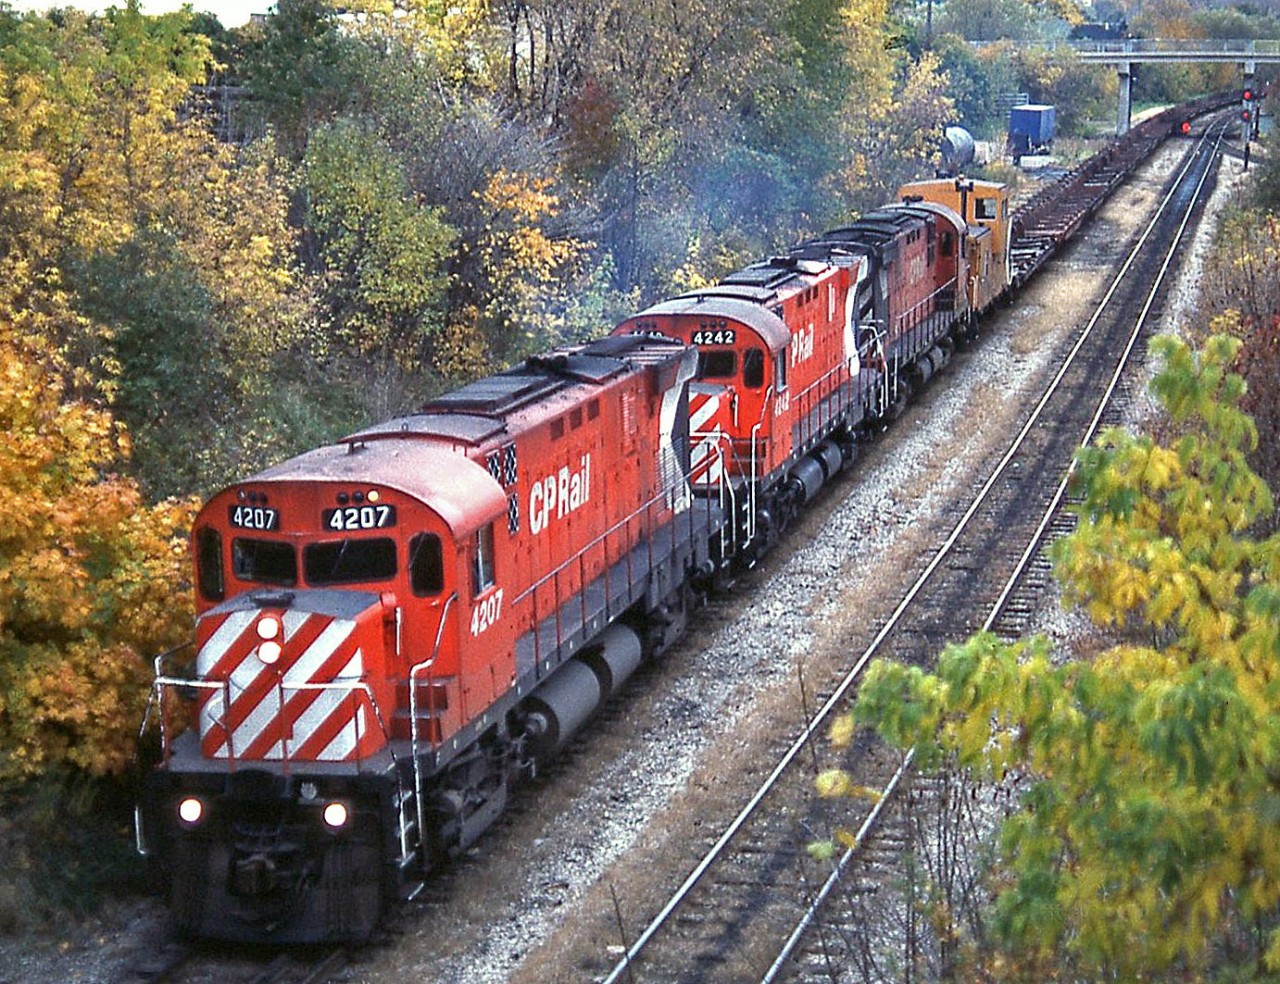 When CP took over running the Steel Train from CN, the power changed from zebra-striped F-units and Geeps to Action Red C424's, SW1200RS, and leased Chessie & B&O power. Here CP C424 4207 leads 4242 and another sister as they head for Nanticoke from Hamilton, running on the former TH&B just before going up the Niagara Escarpment.